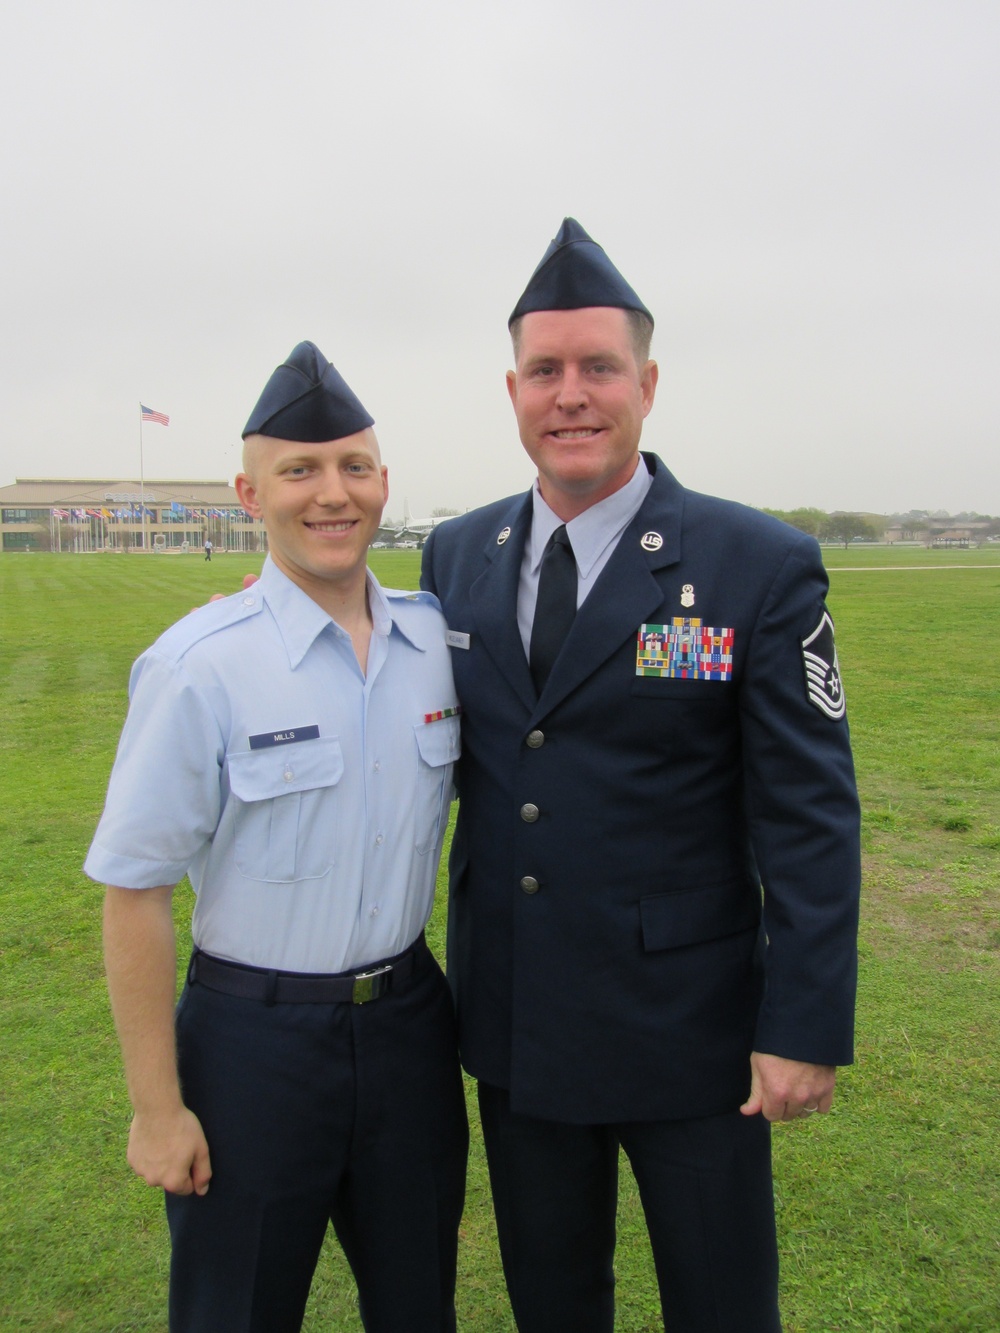 Father and son duo share deployment together